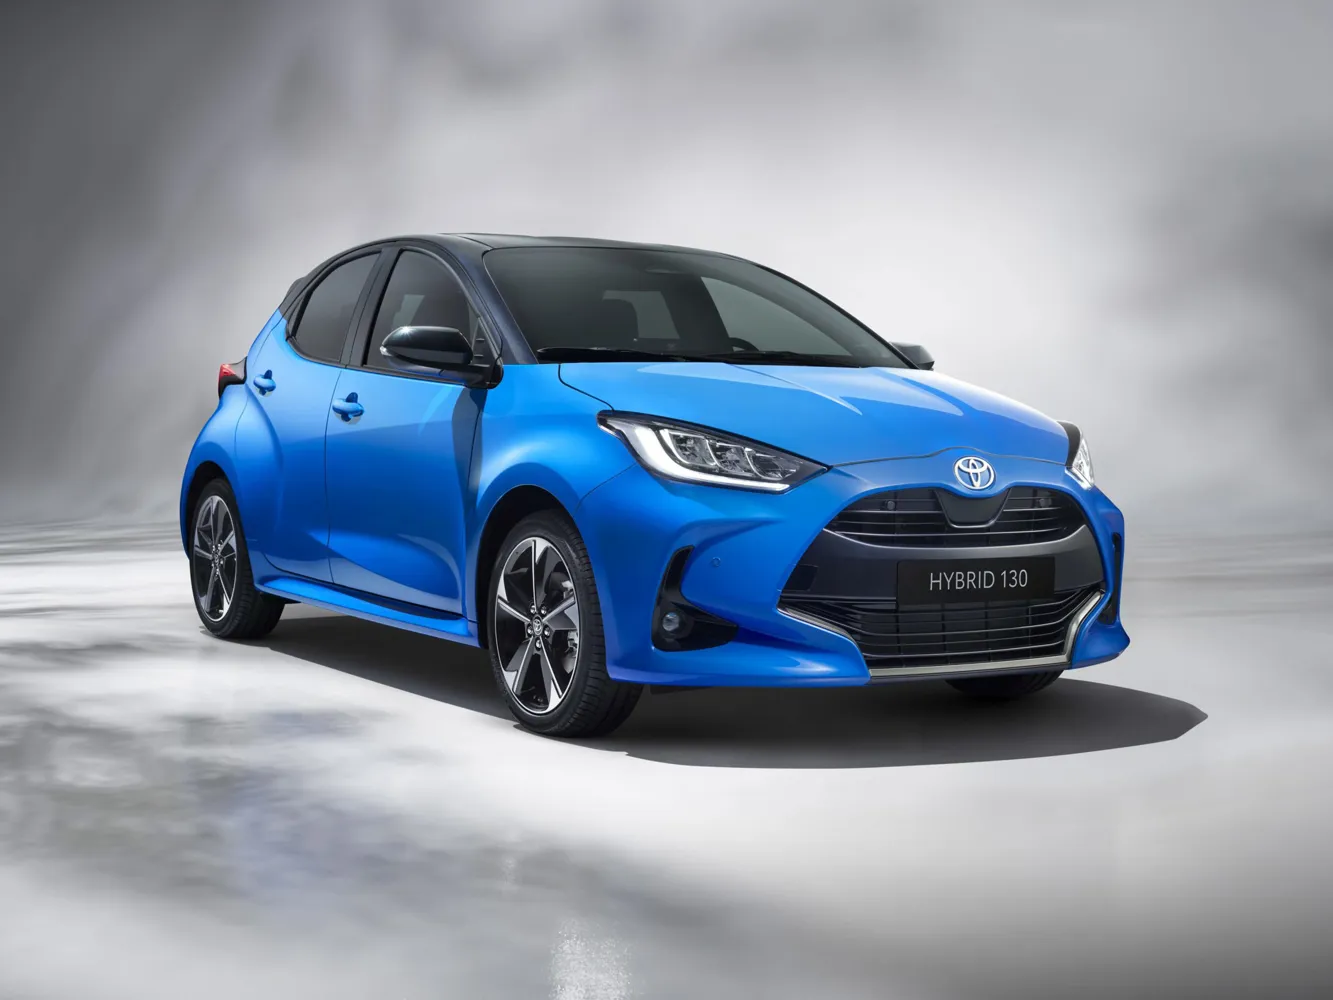 Toyota Yaris given power boost and new infotainment as part of